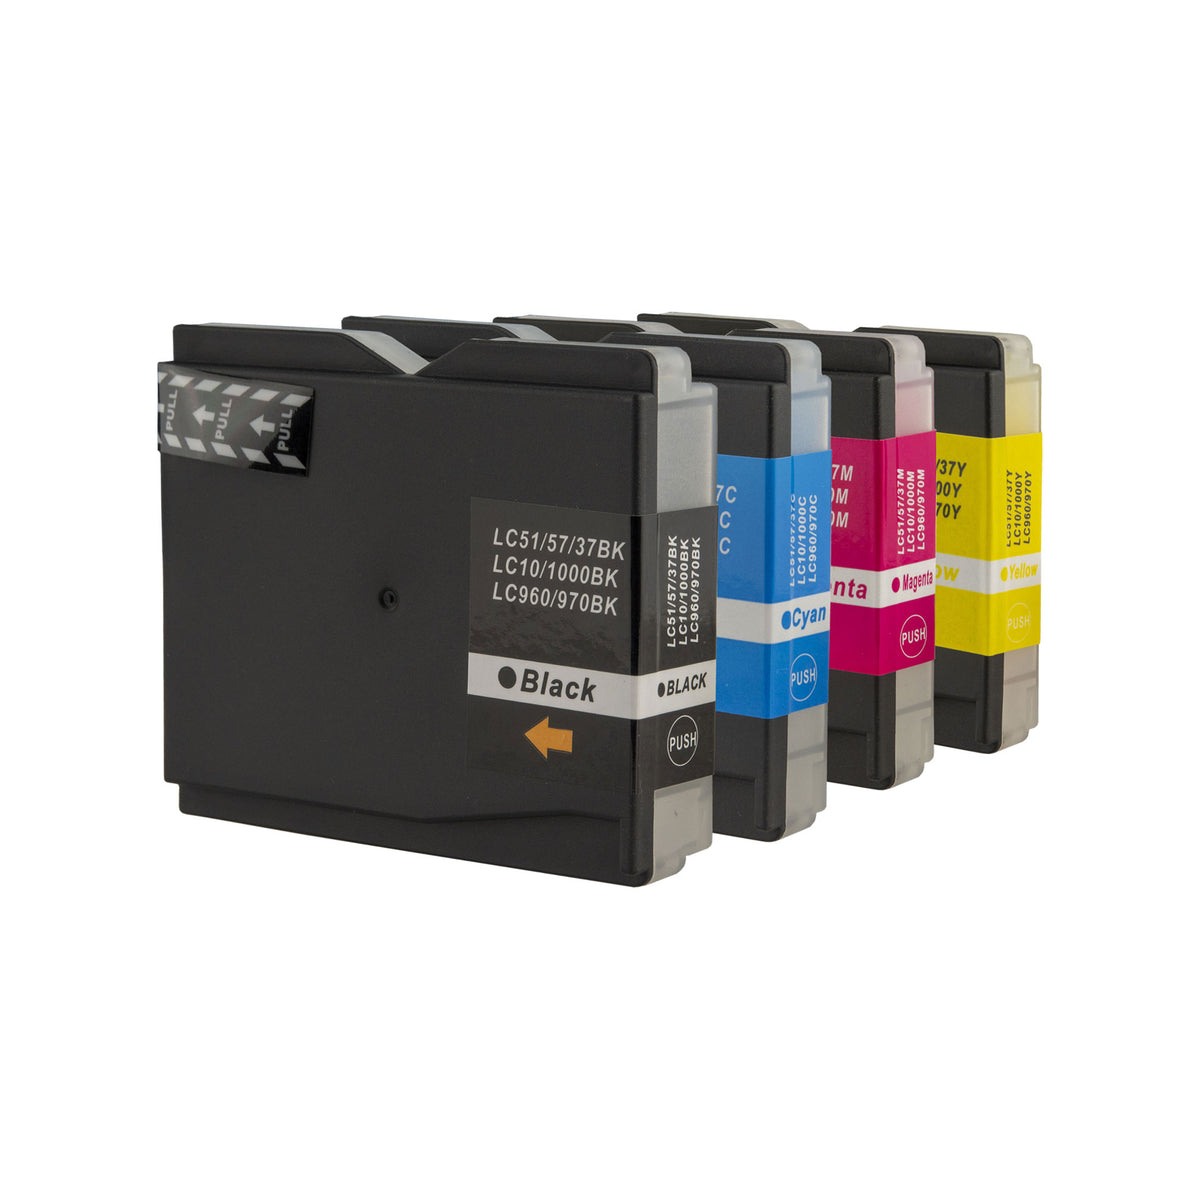 4x Compatible Brother LC-57 (BK+C+M+Y) Ink Cartridges